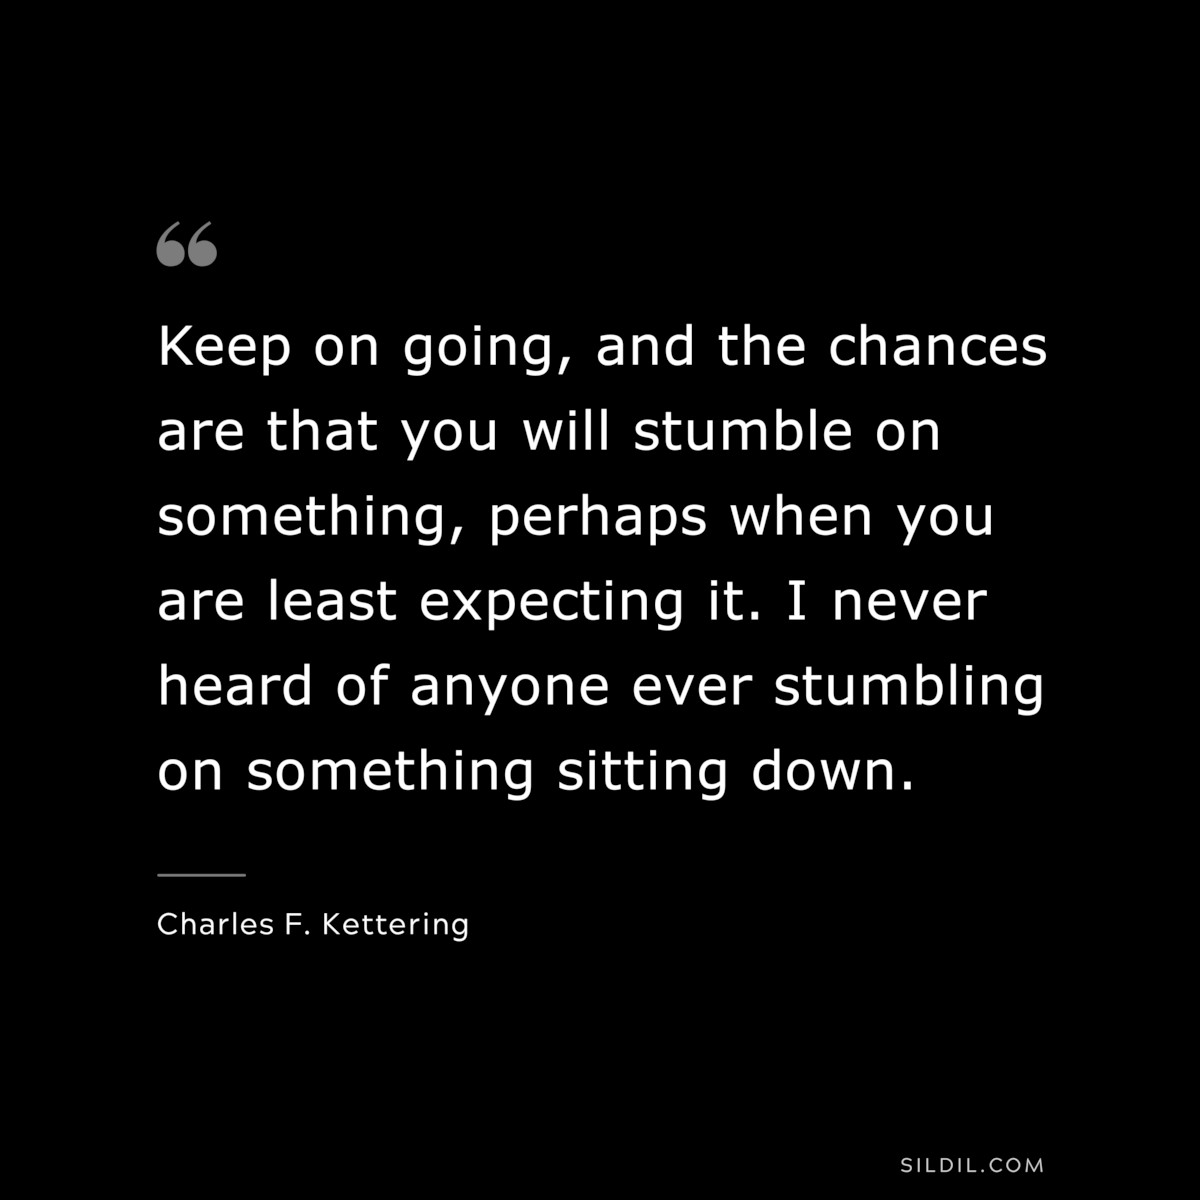 Keep on going, and the chances are that you will stumble on something, perhaps when you are least expecting it. I never heard of anyone ever stumbling on something sitting down. ― Charles F. Kettering